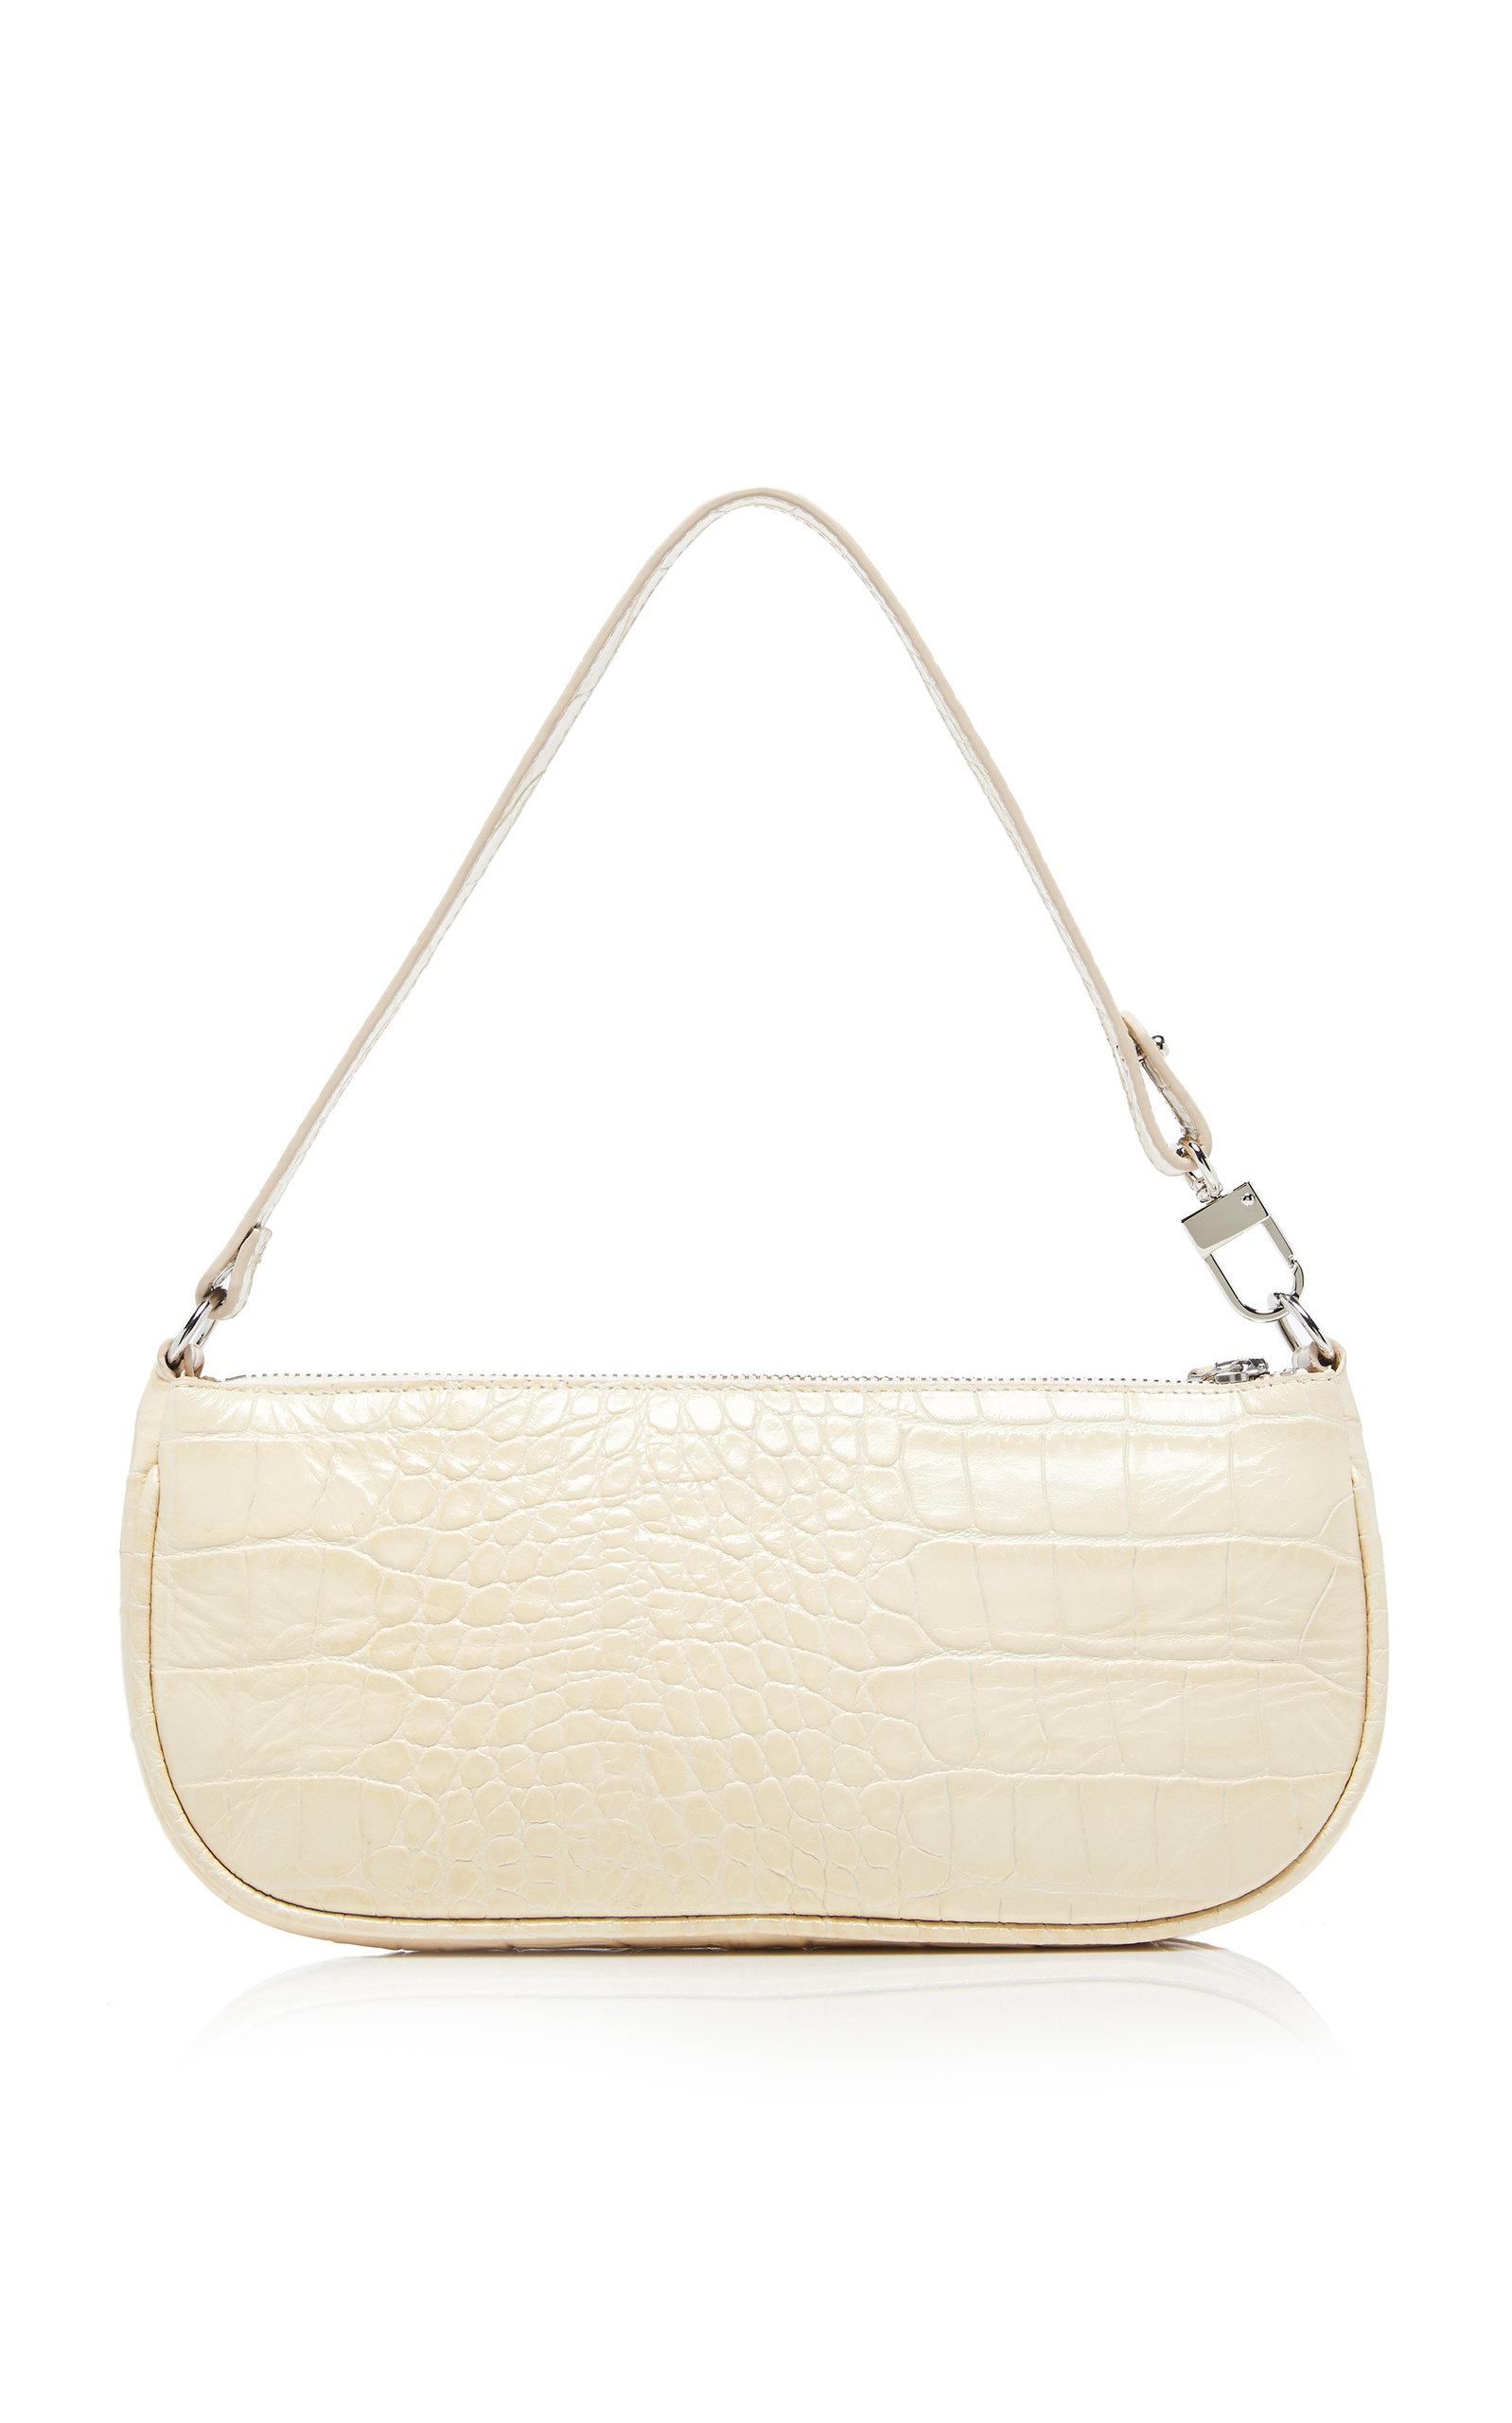 BY FAR Rachel Croco Embossed Leather Bag in White - Lyst